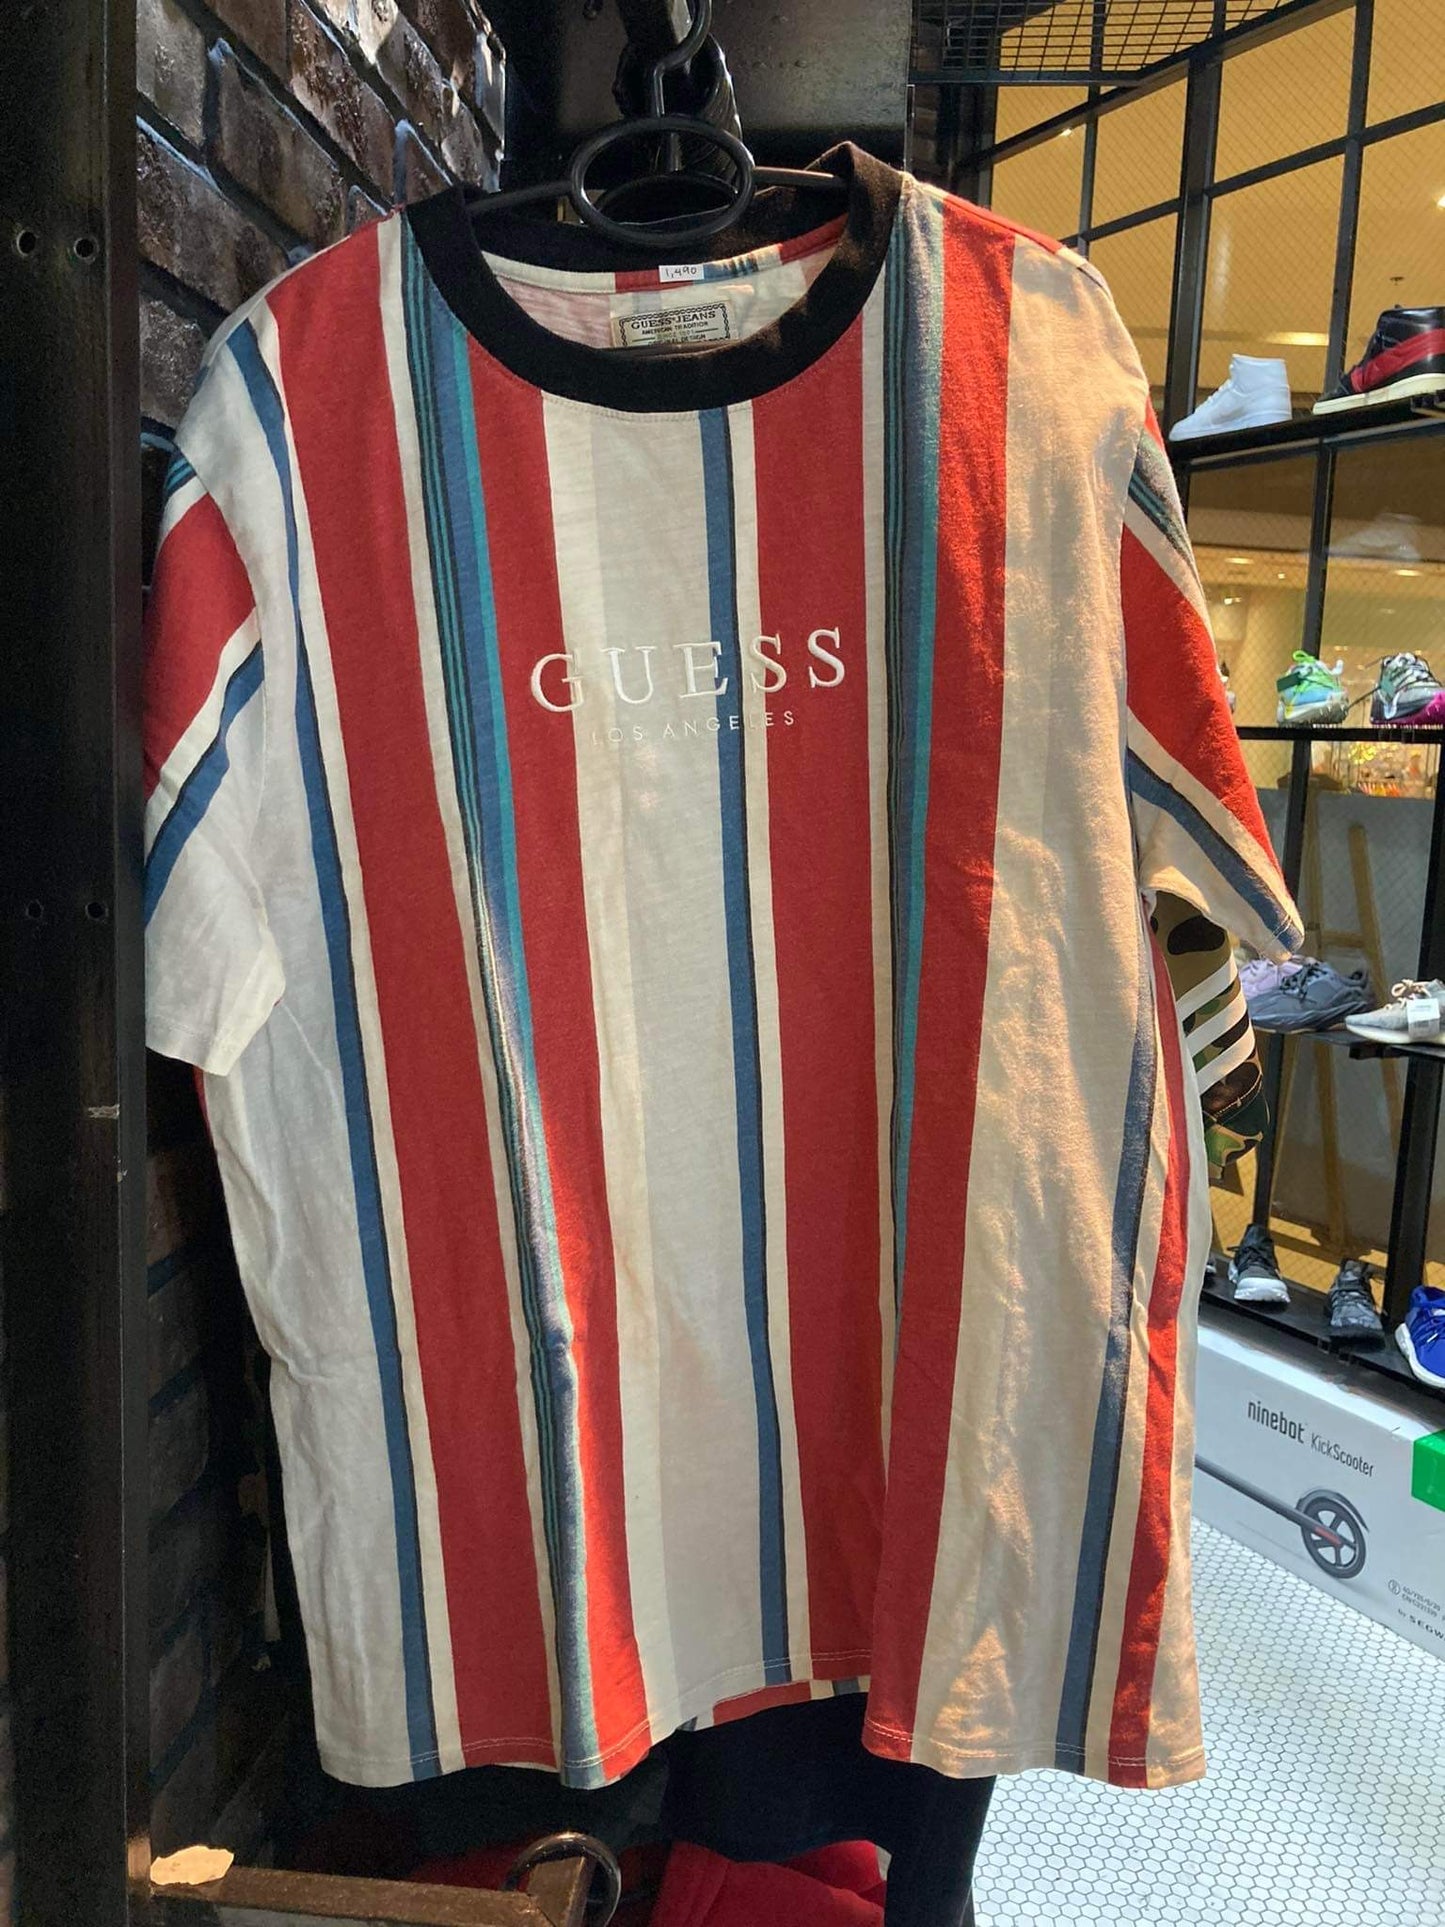 Guess Stripes Tee